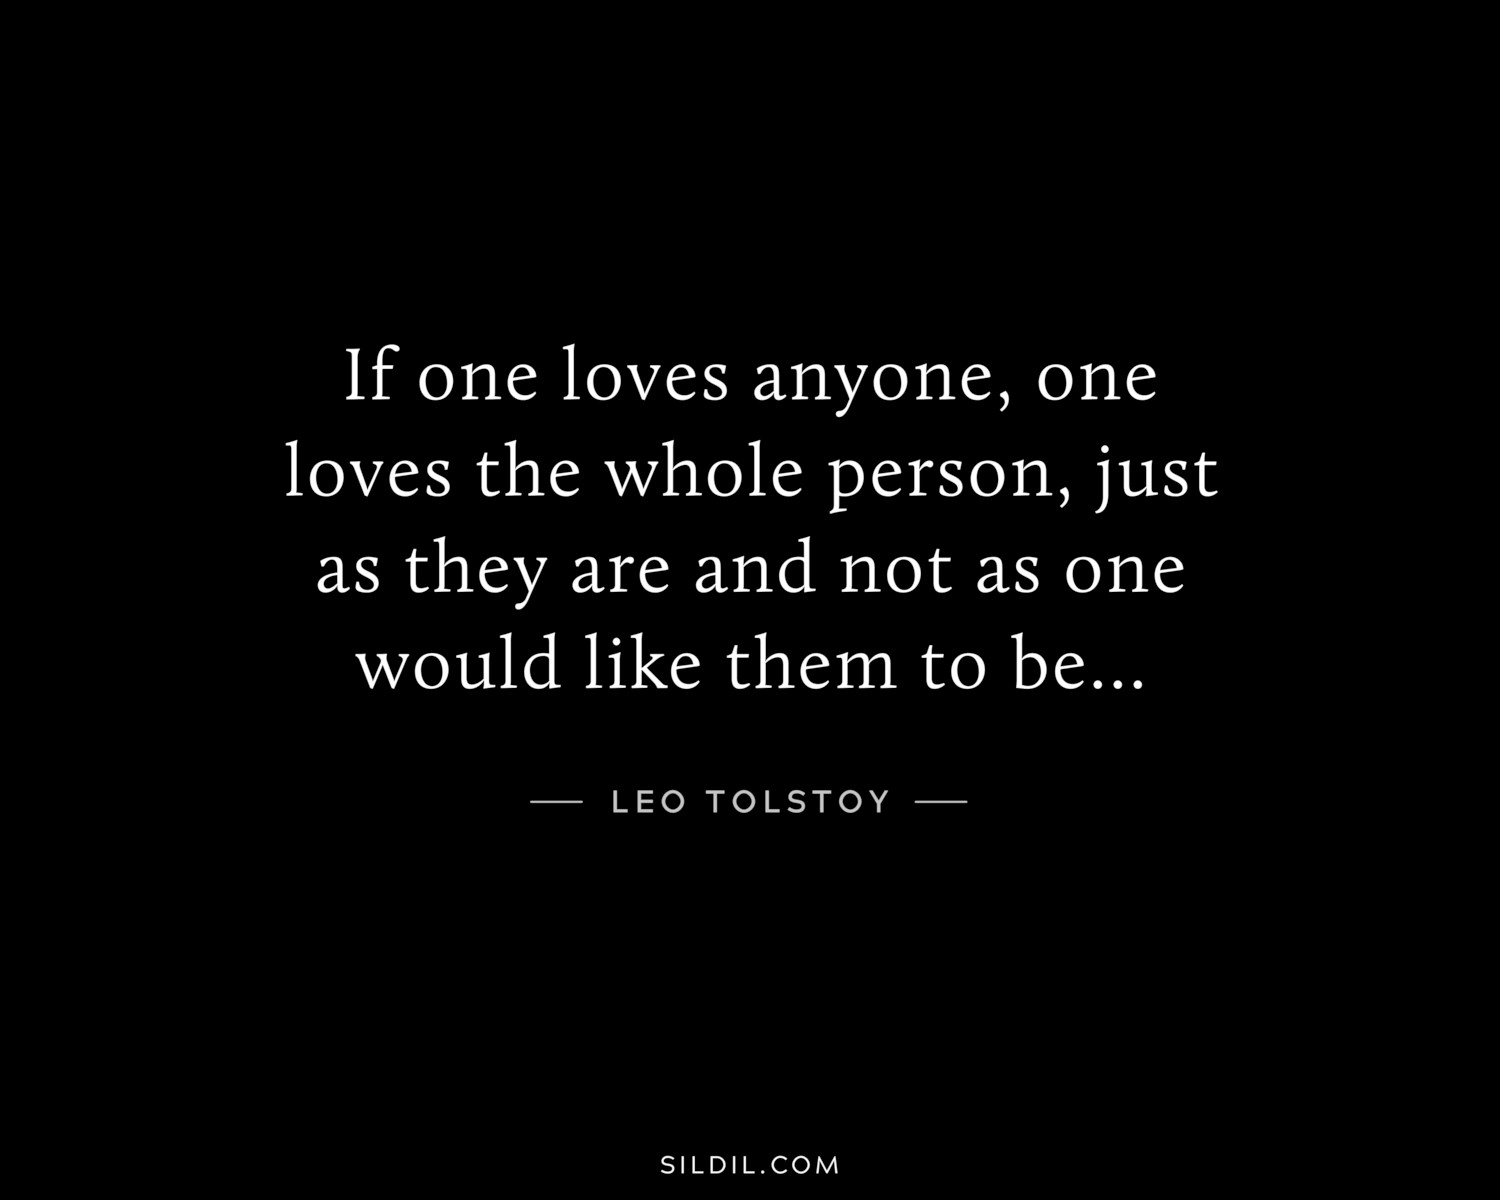 If one loves anyone, one loves the whole person, just as they are and not as one would like them to be…